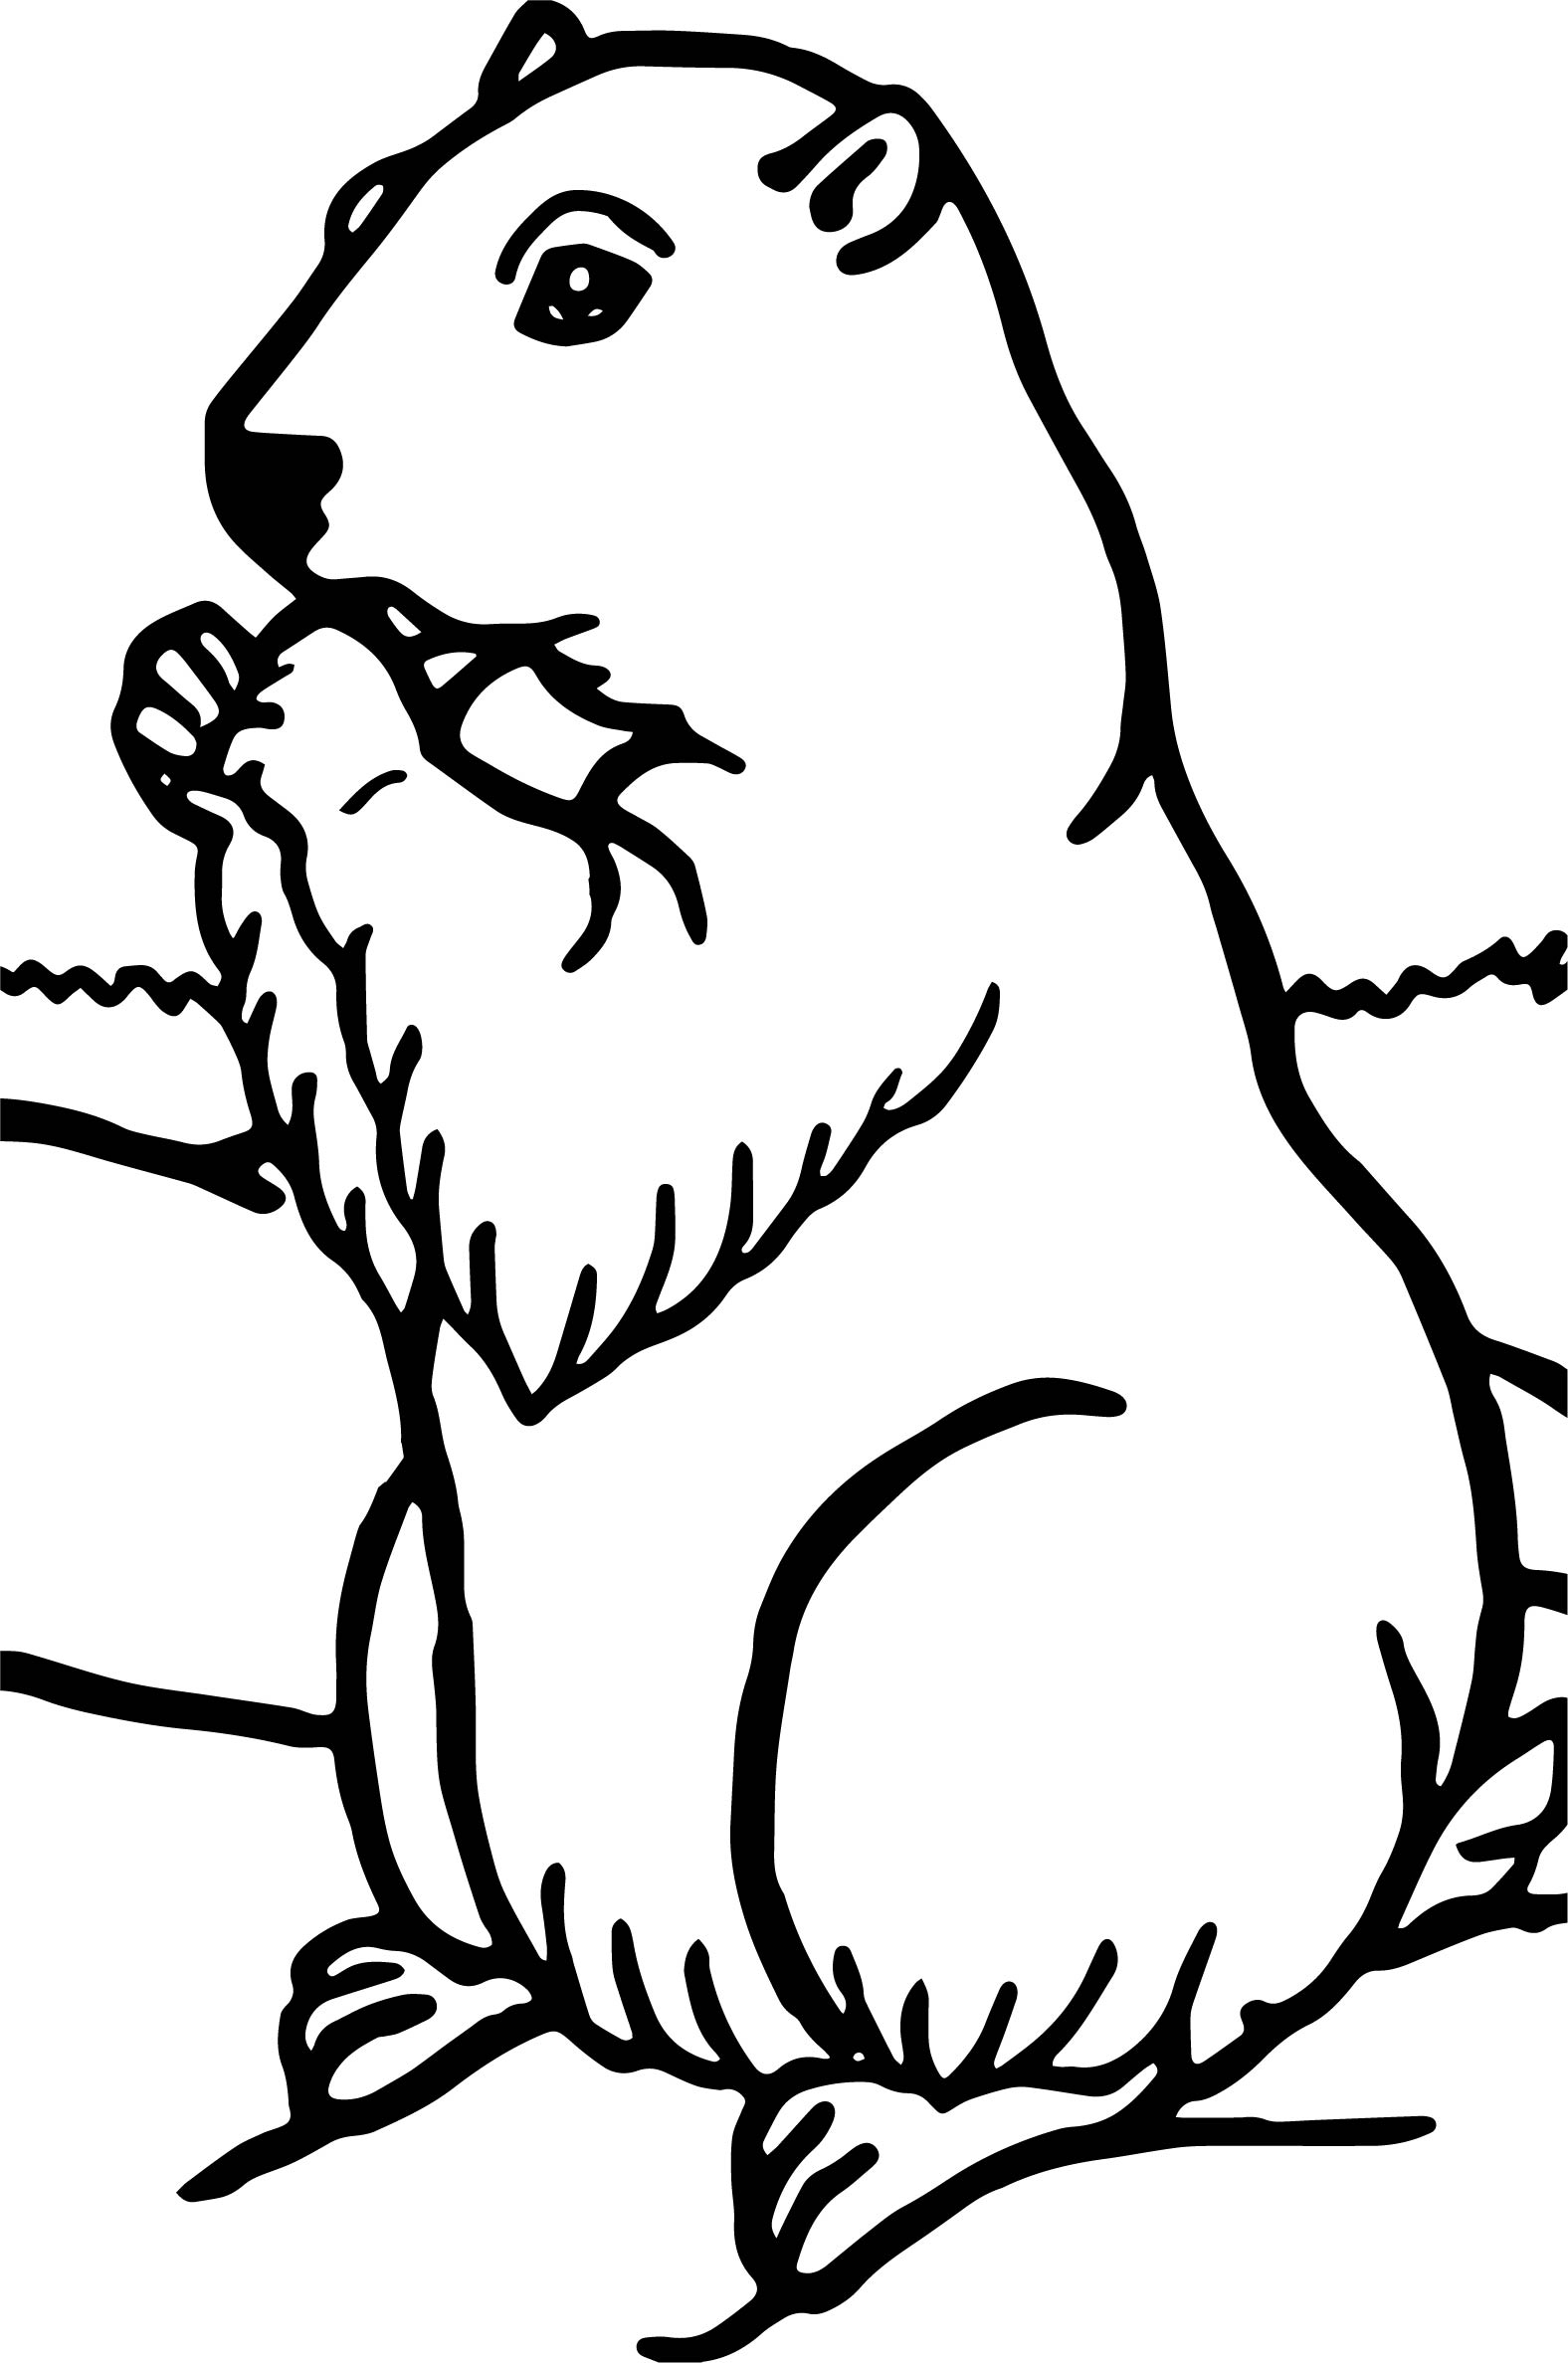 groundhog-printable-coloring-pages-printable-word-searches